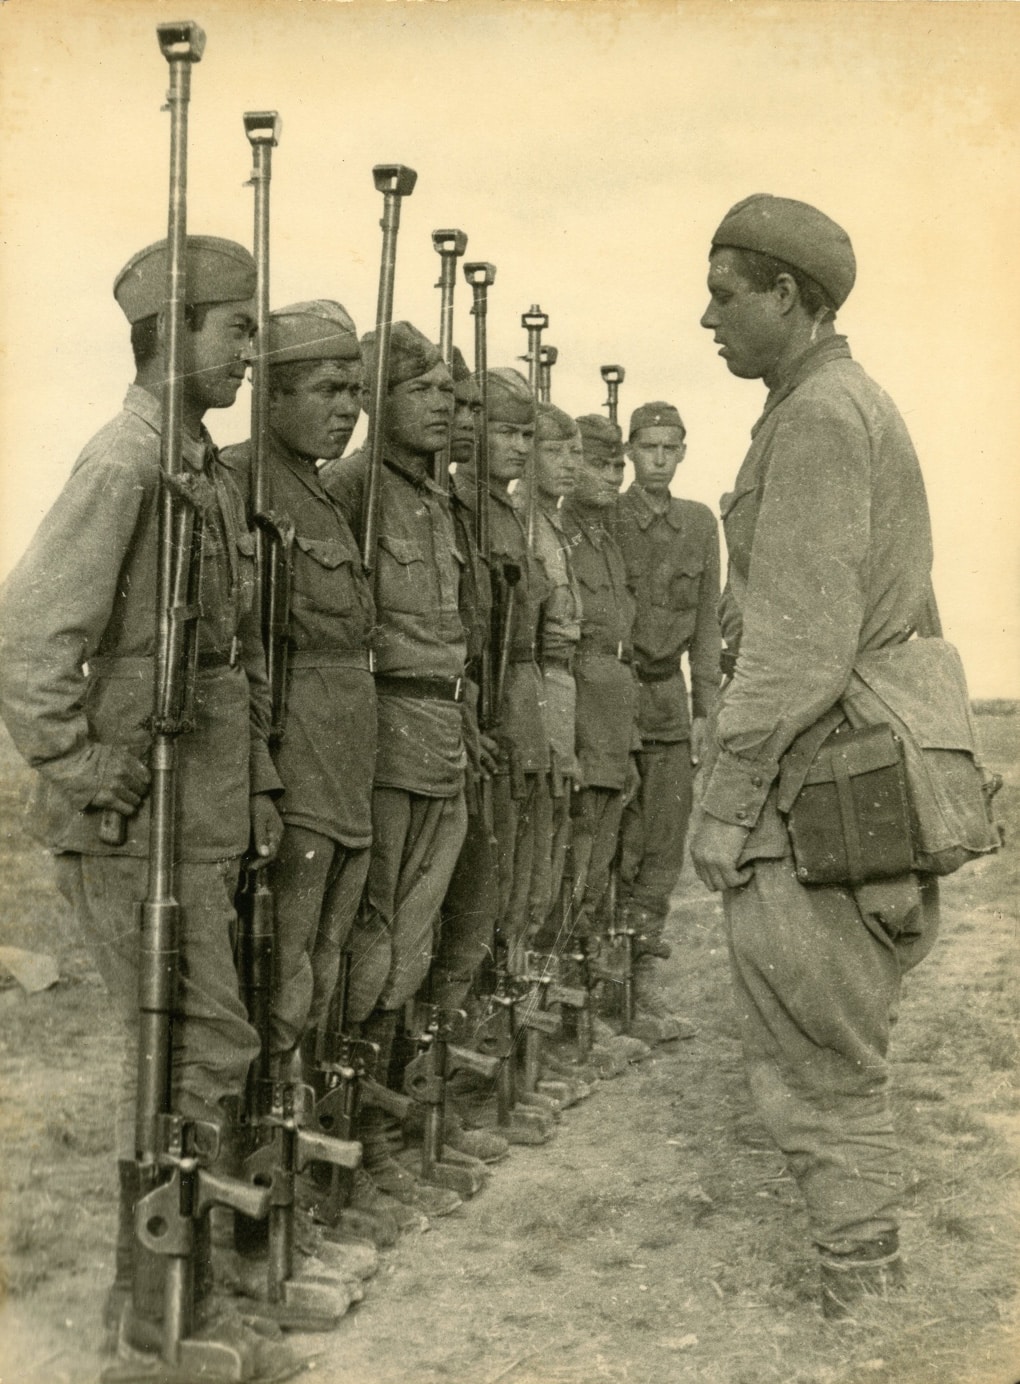 russian soldiers at inspection with ptrd-41 rifles